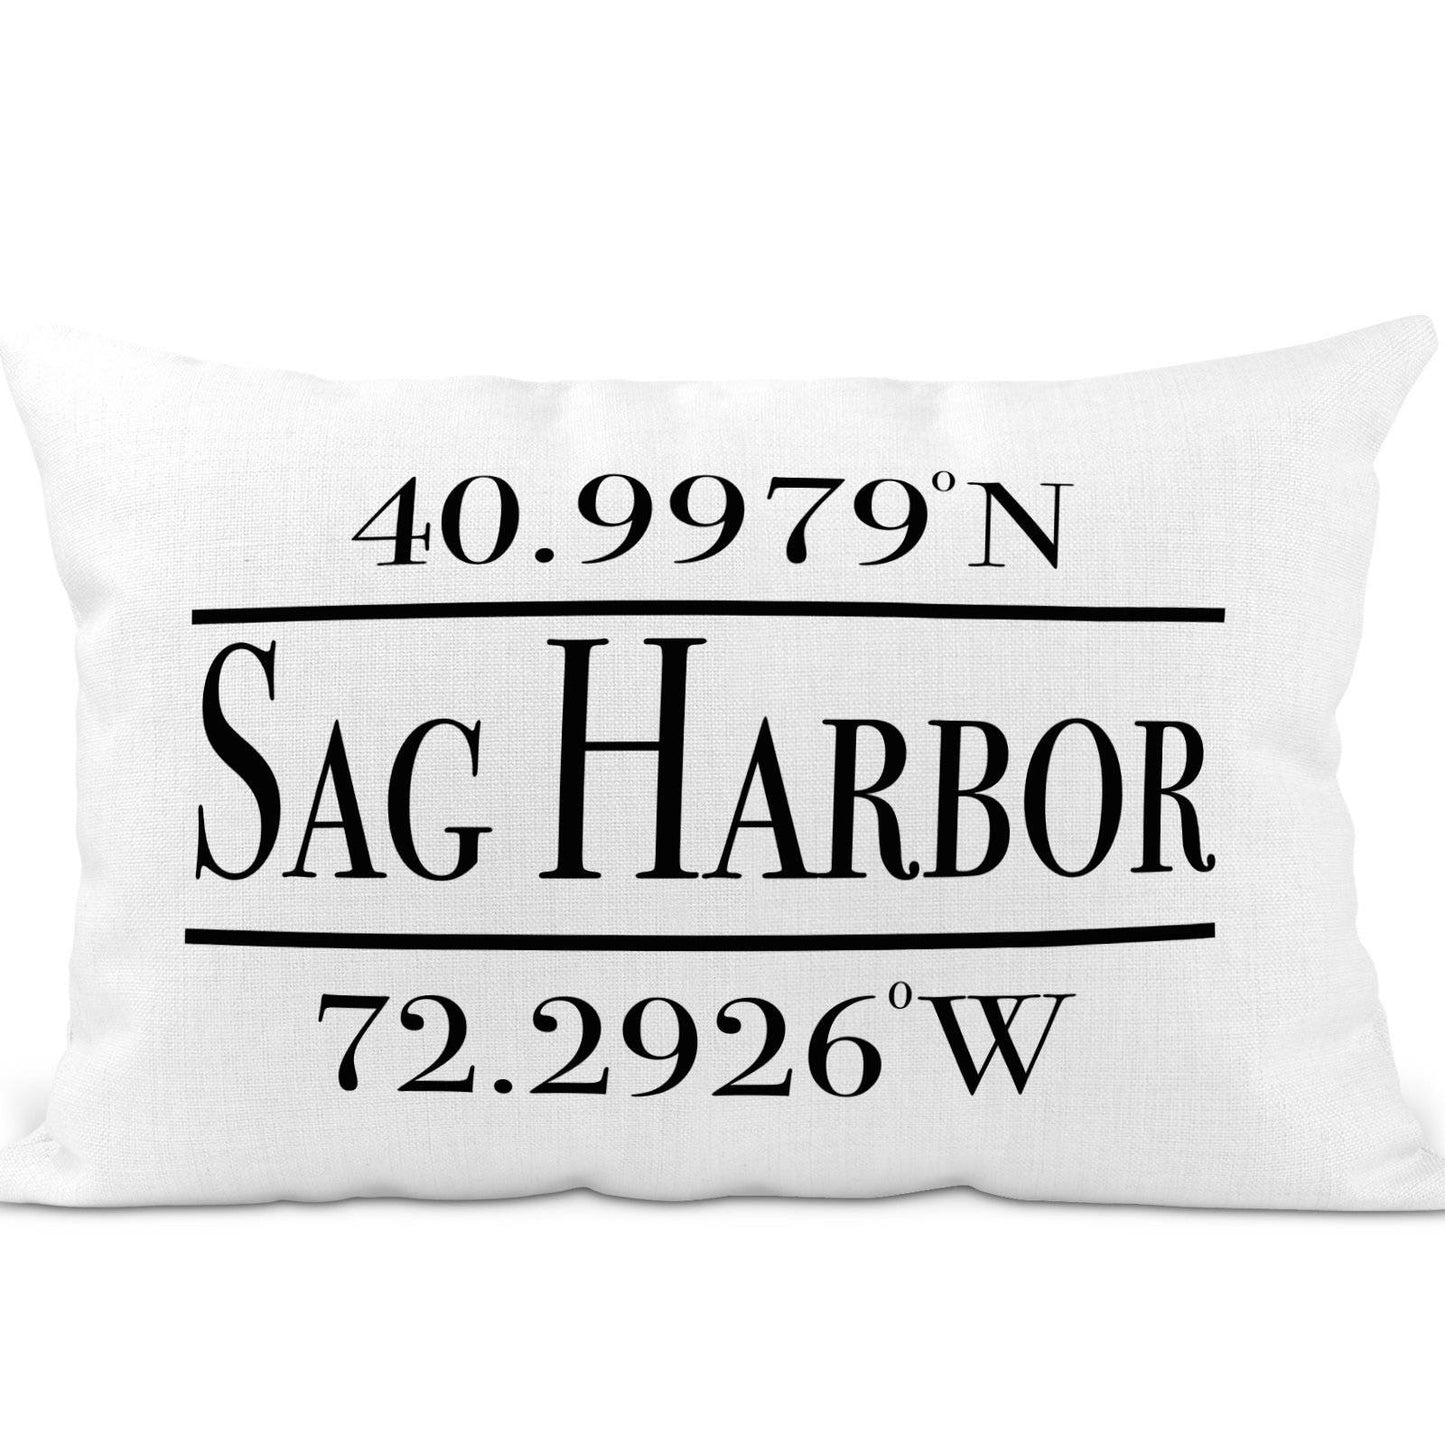 Sag Harbor Latitude Longitude Pillow - by Drifts East , white poly-canvas pillow with Sag Harbor and its coordinates printed in black ink